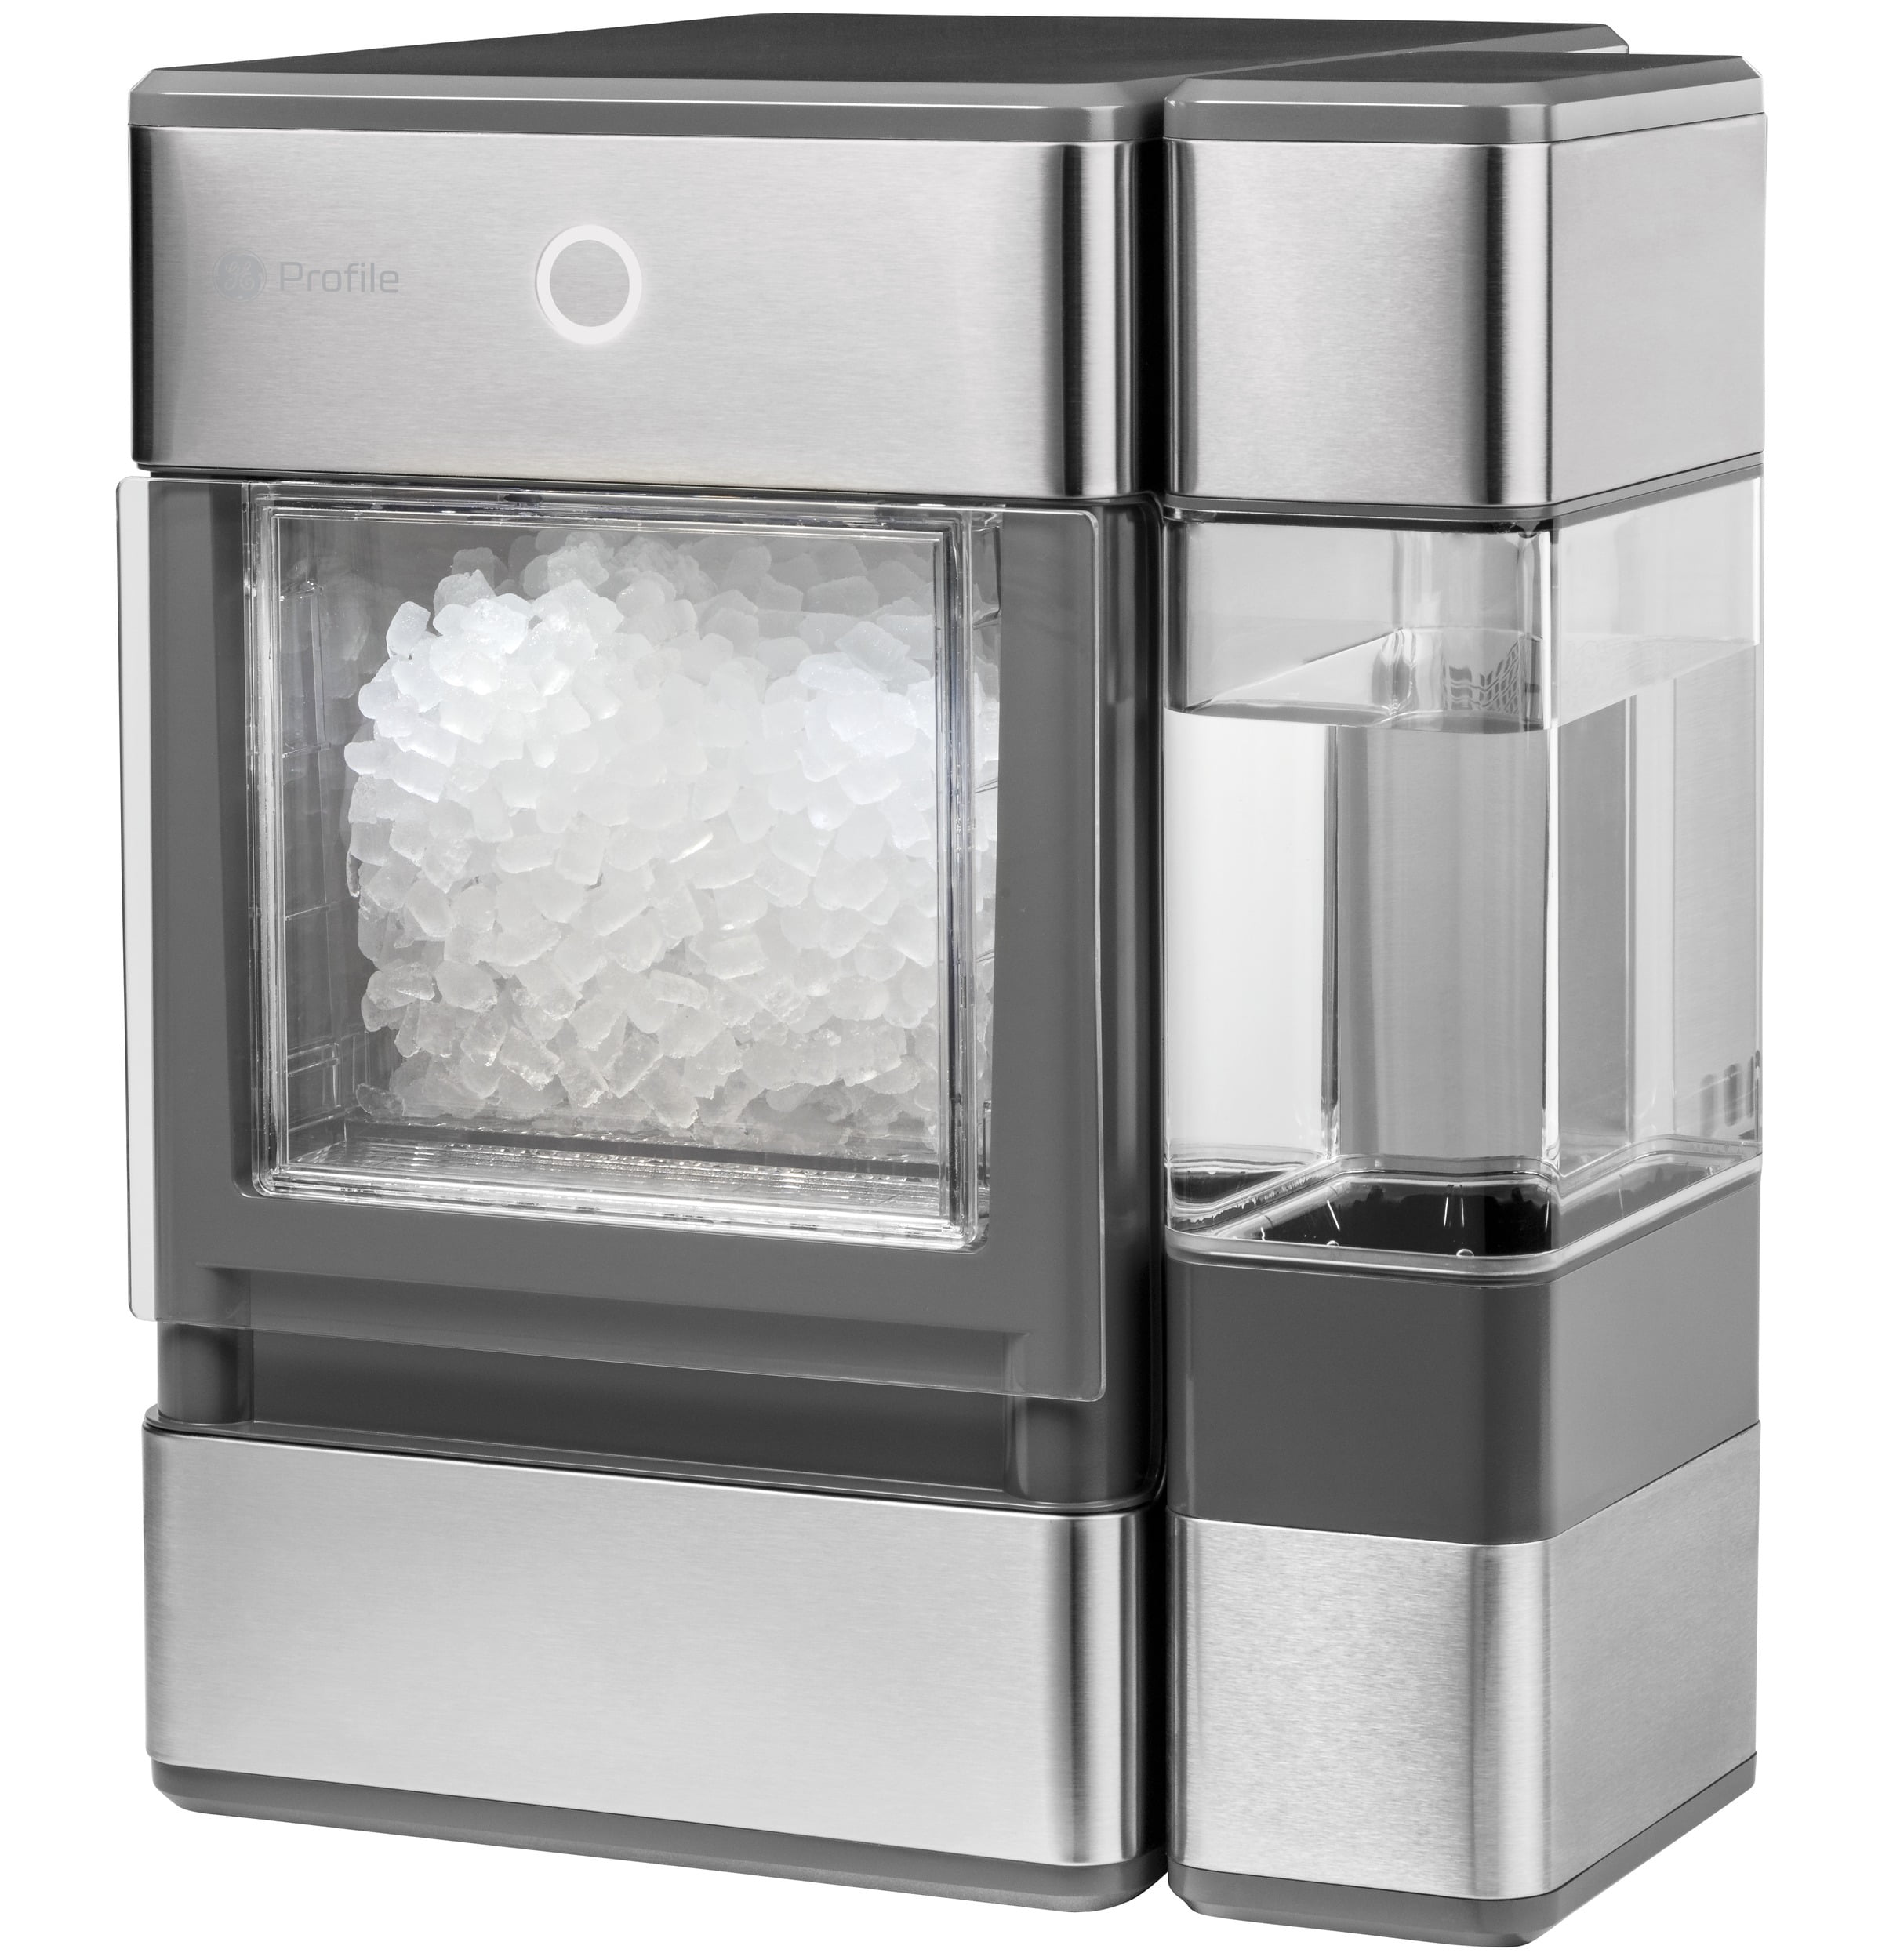 GE Profile™ Opal™ Nugget Ice Maker + Side Tank, Makes up to 24lbs per day, Countertop Icemaker, Stainless Steel - 1